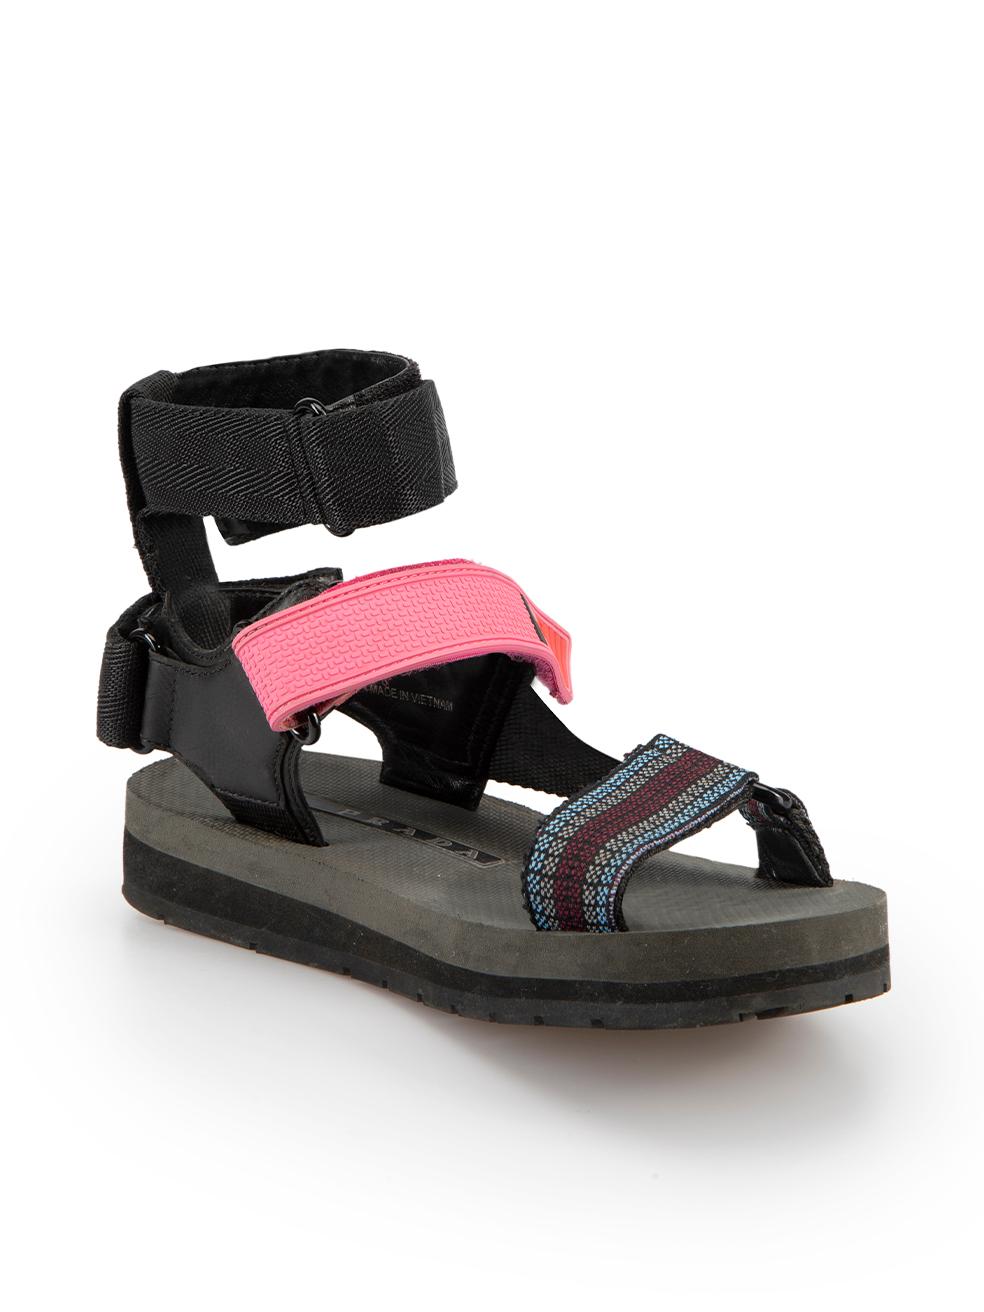 CONDITION is Good. Minor wear to sandals is evident. Light wear to sole and straps with scuff marks on this used Prada Sport designer resale item. 



Details


Black

Cloth textile

Sandals

Open toe

Geometric patterned straps

Flat heel

Double